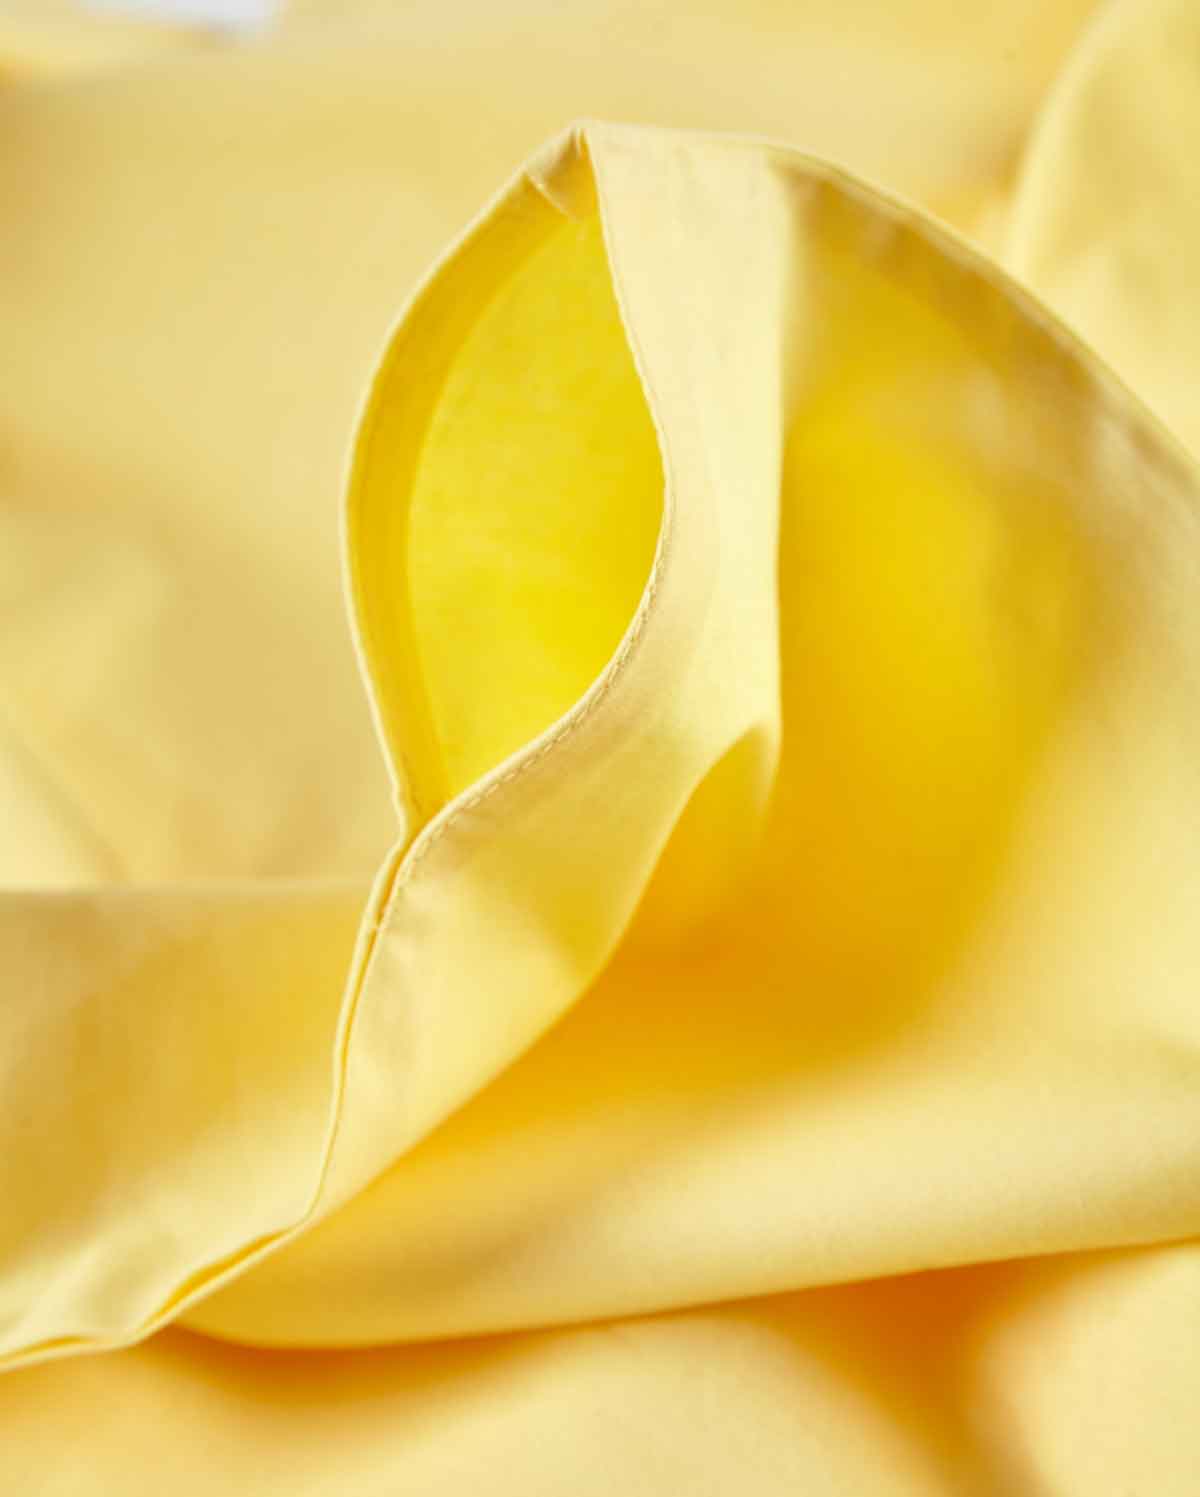 Classic Percale - Fitted Sheet Set - Yellow